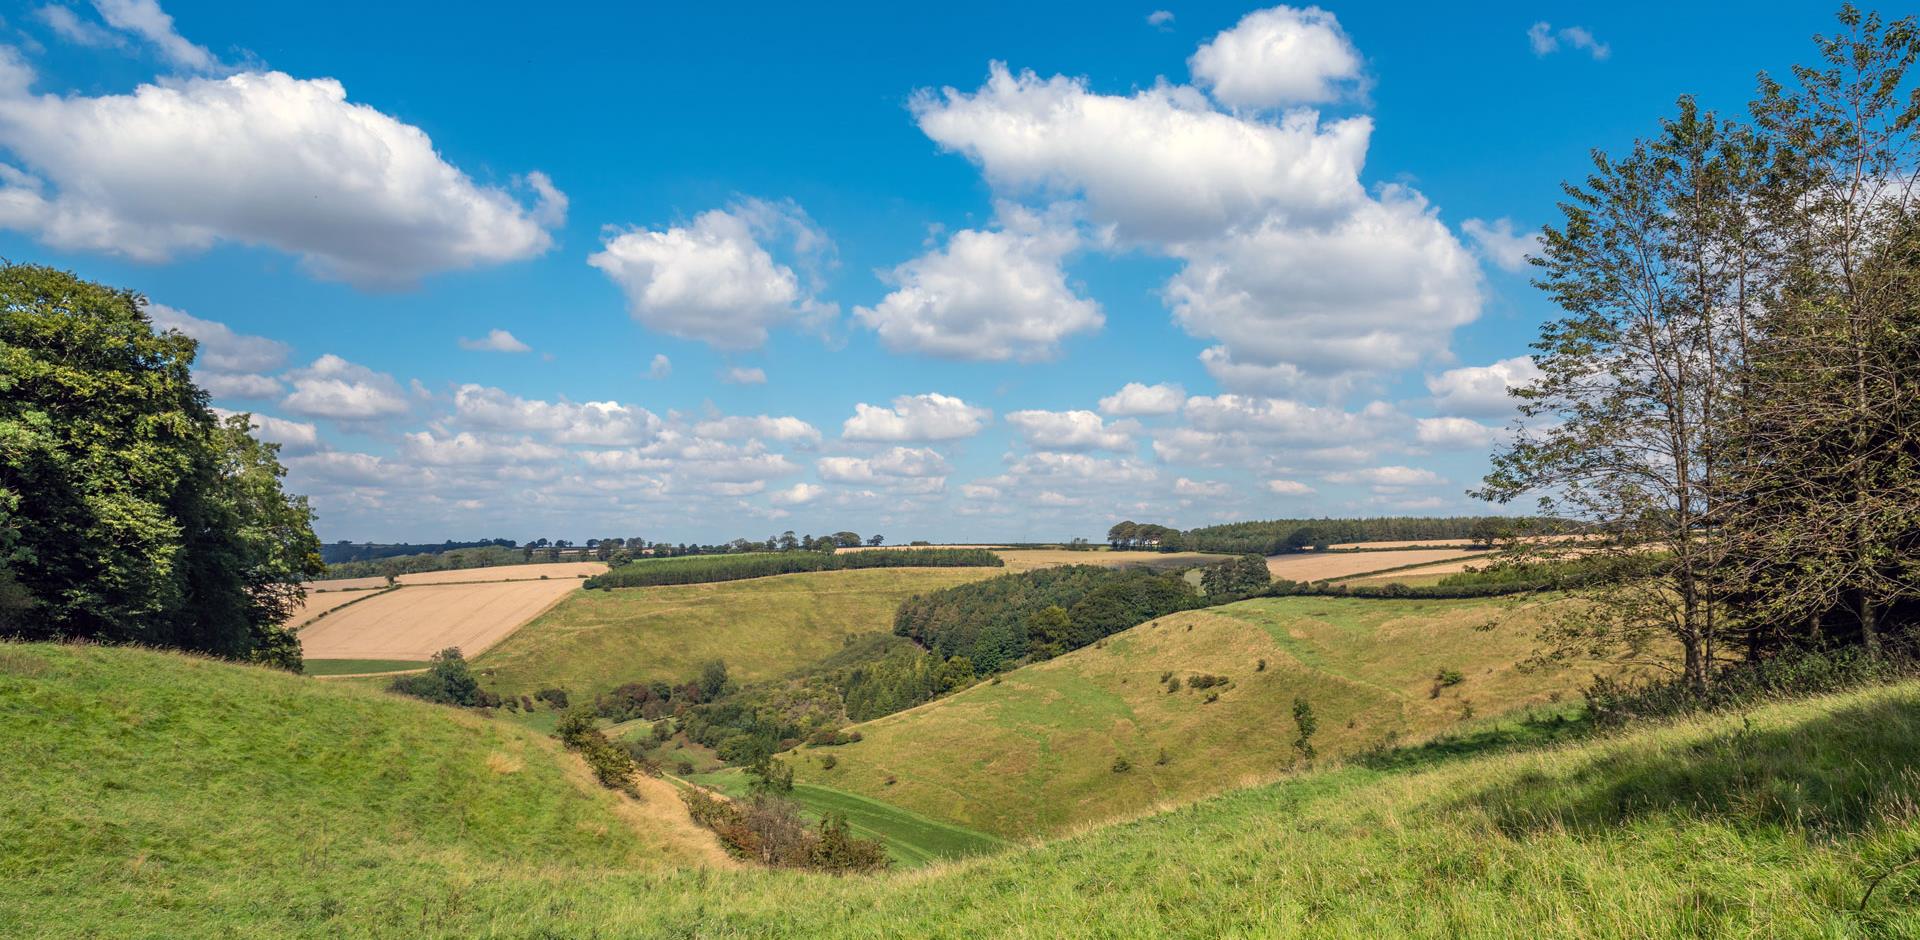 Yorkshire Wolds, East Yorkshire